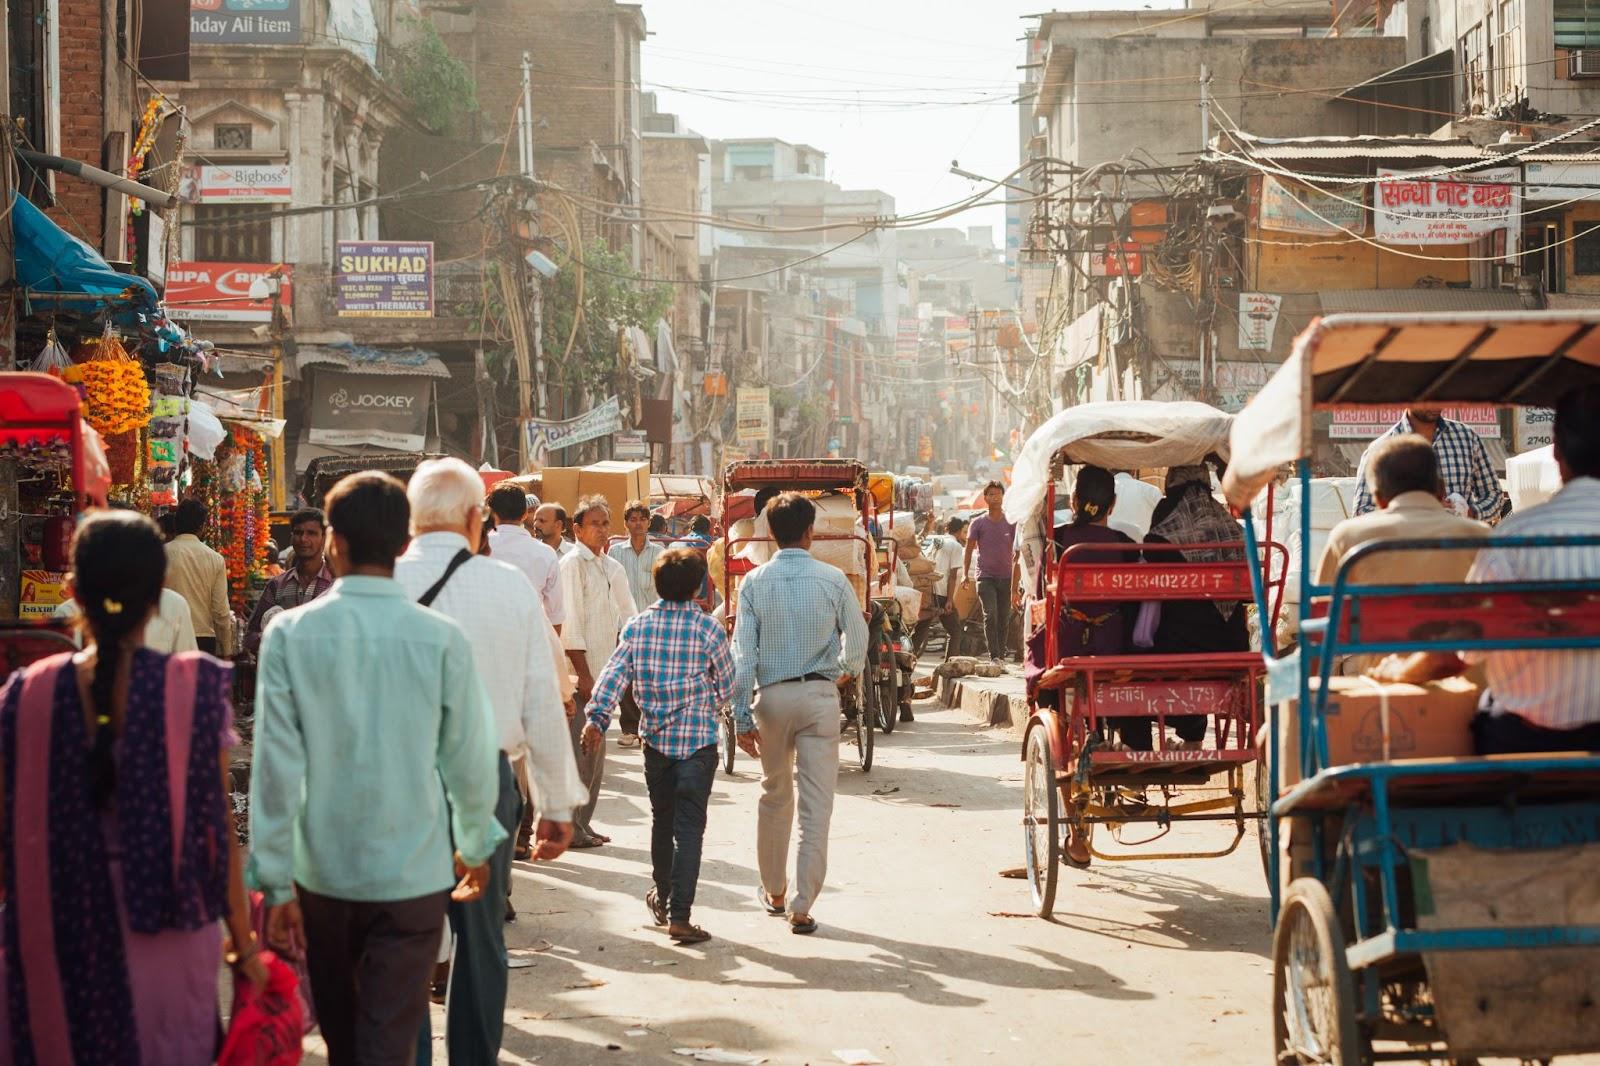 Crowd of people on the street of Chandni Chowk in Old Delhi, India